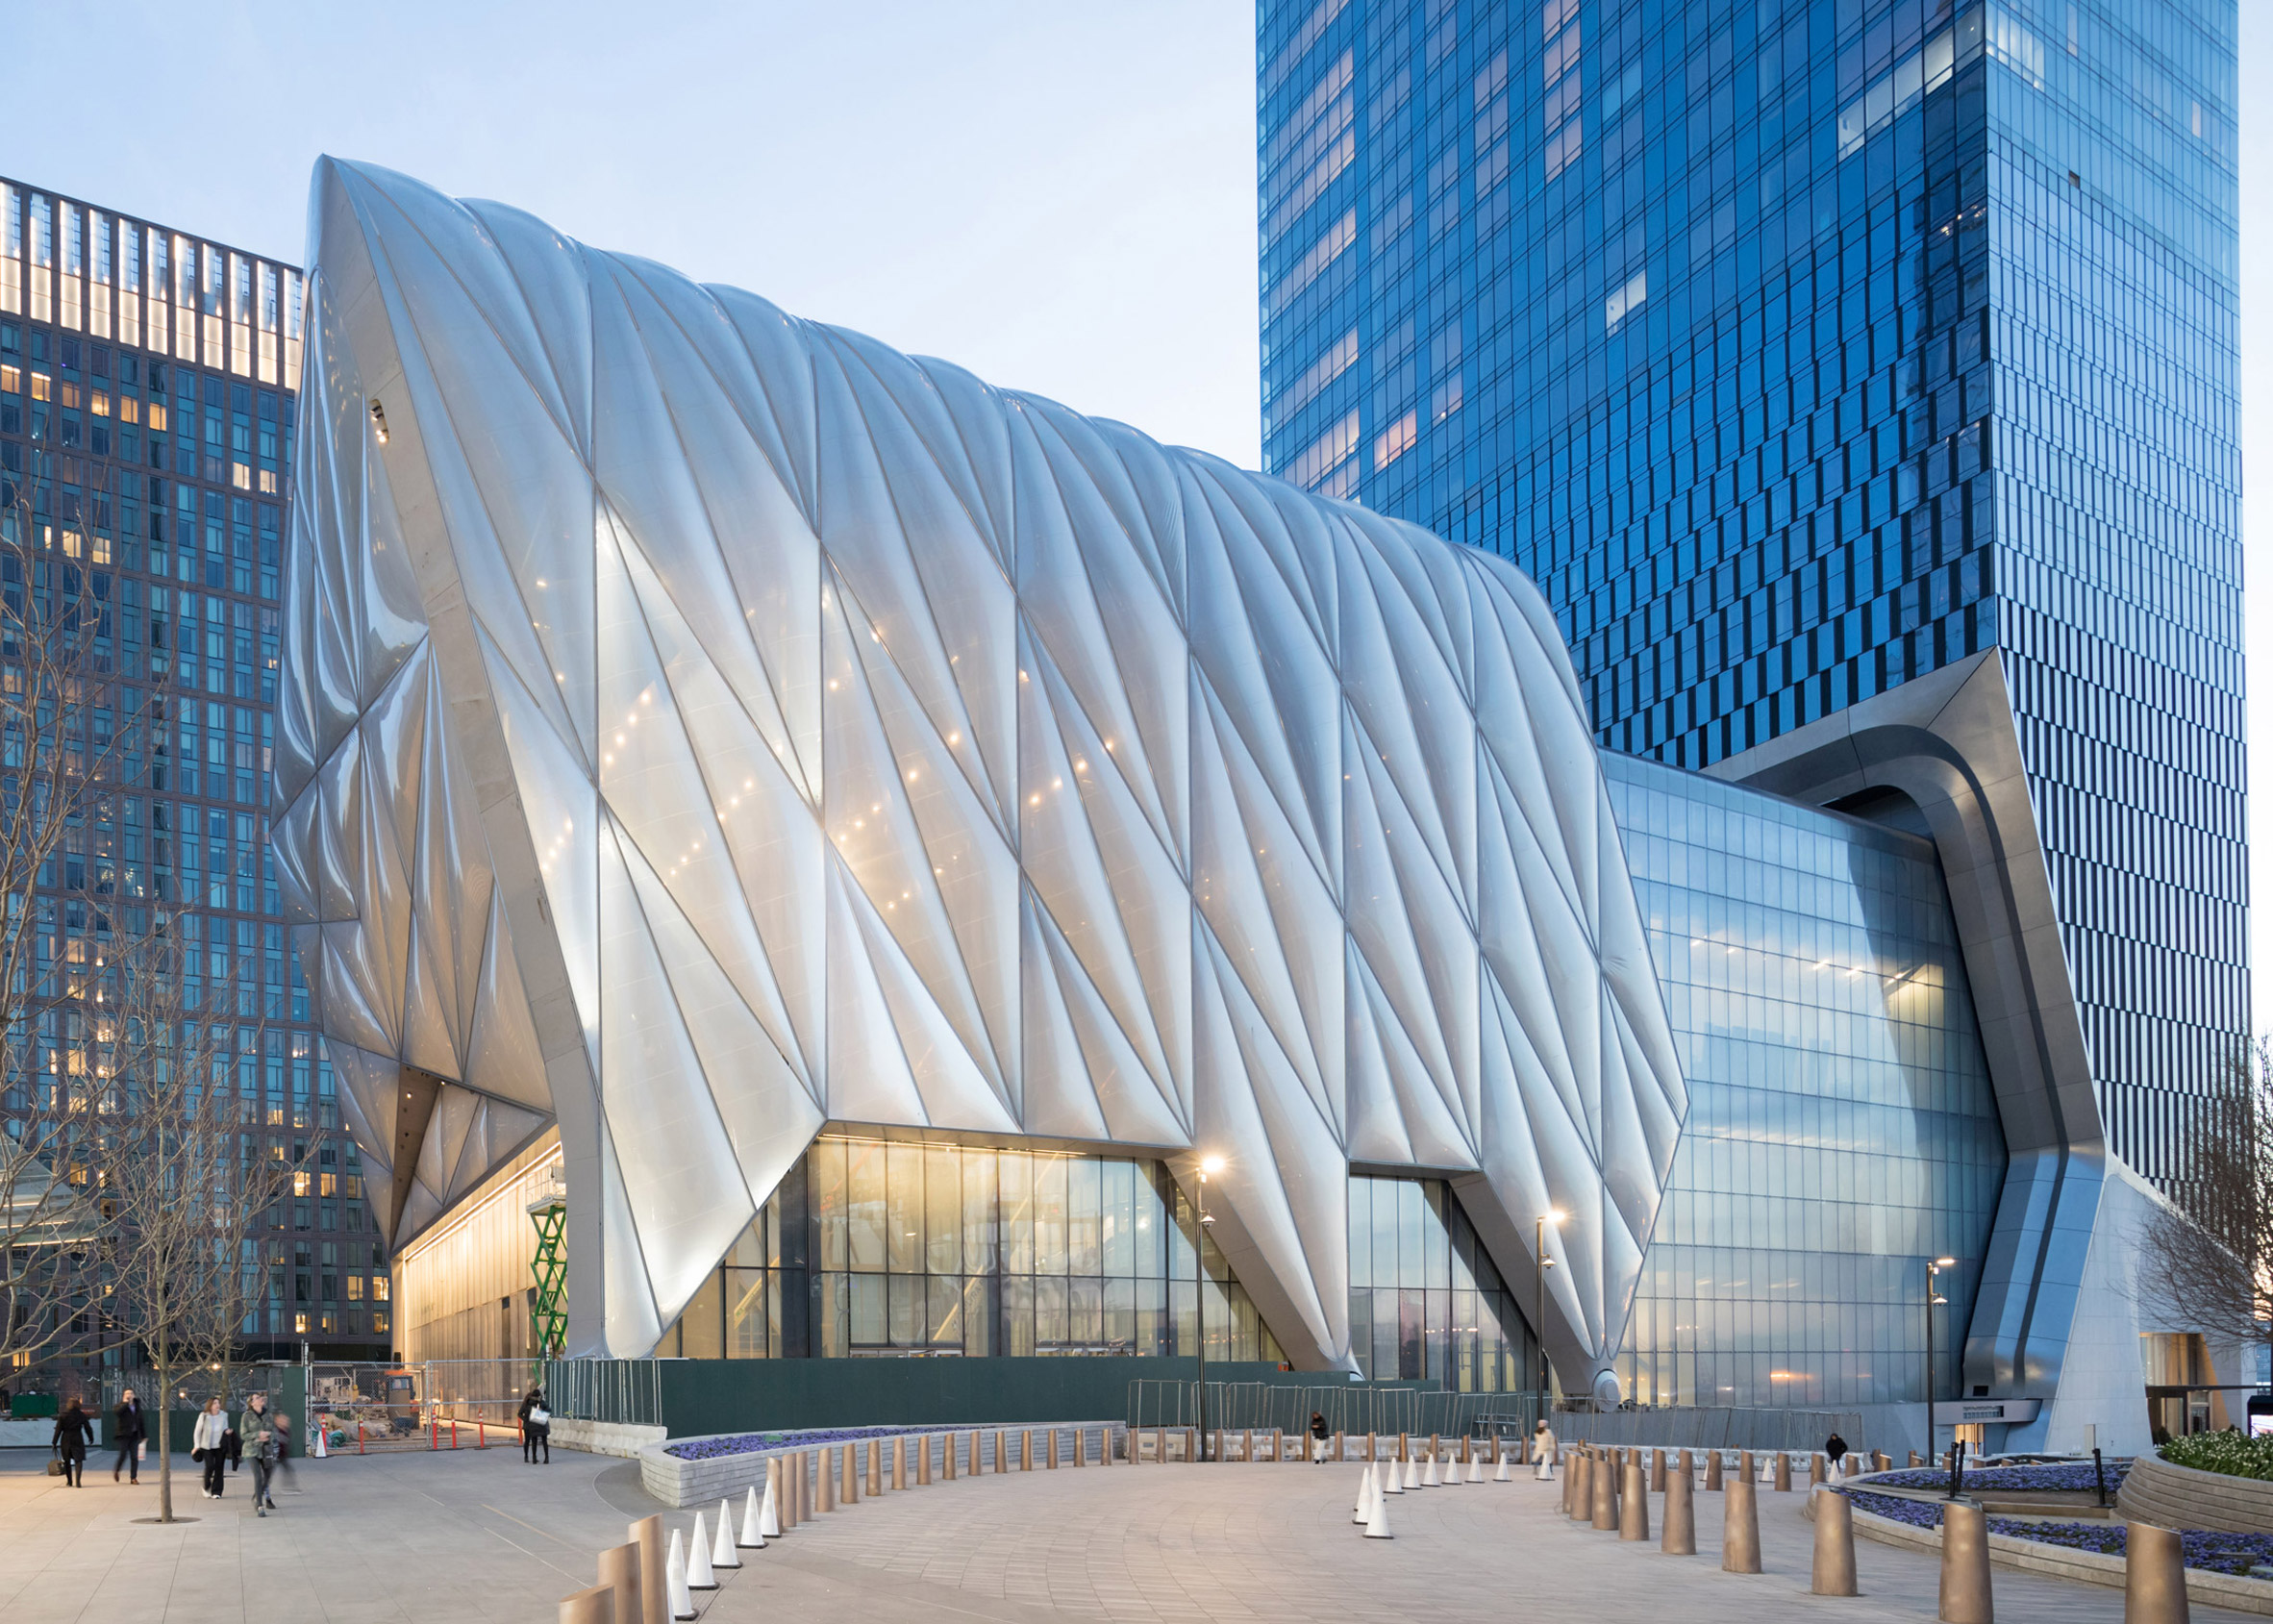 NYC's first-ever Neiman Marcus just opened in Hudson Yards. The